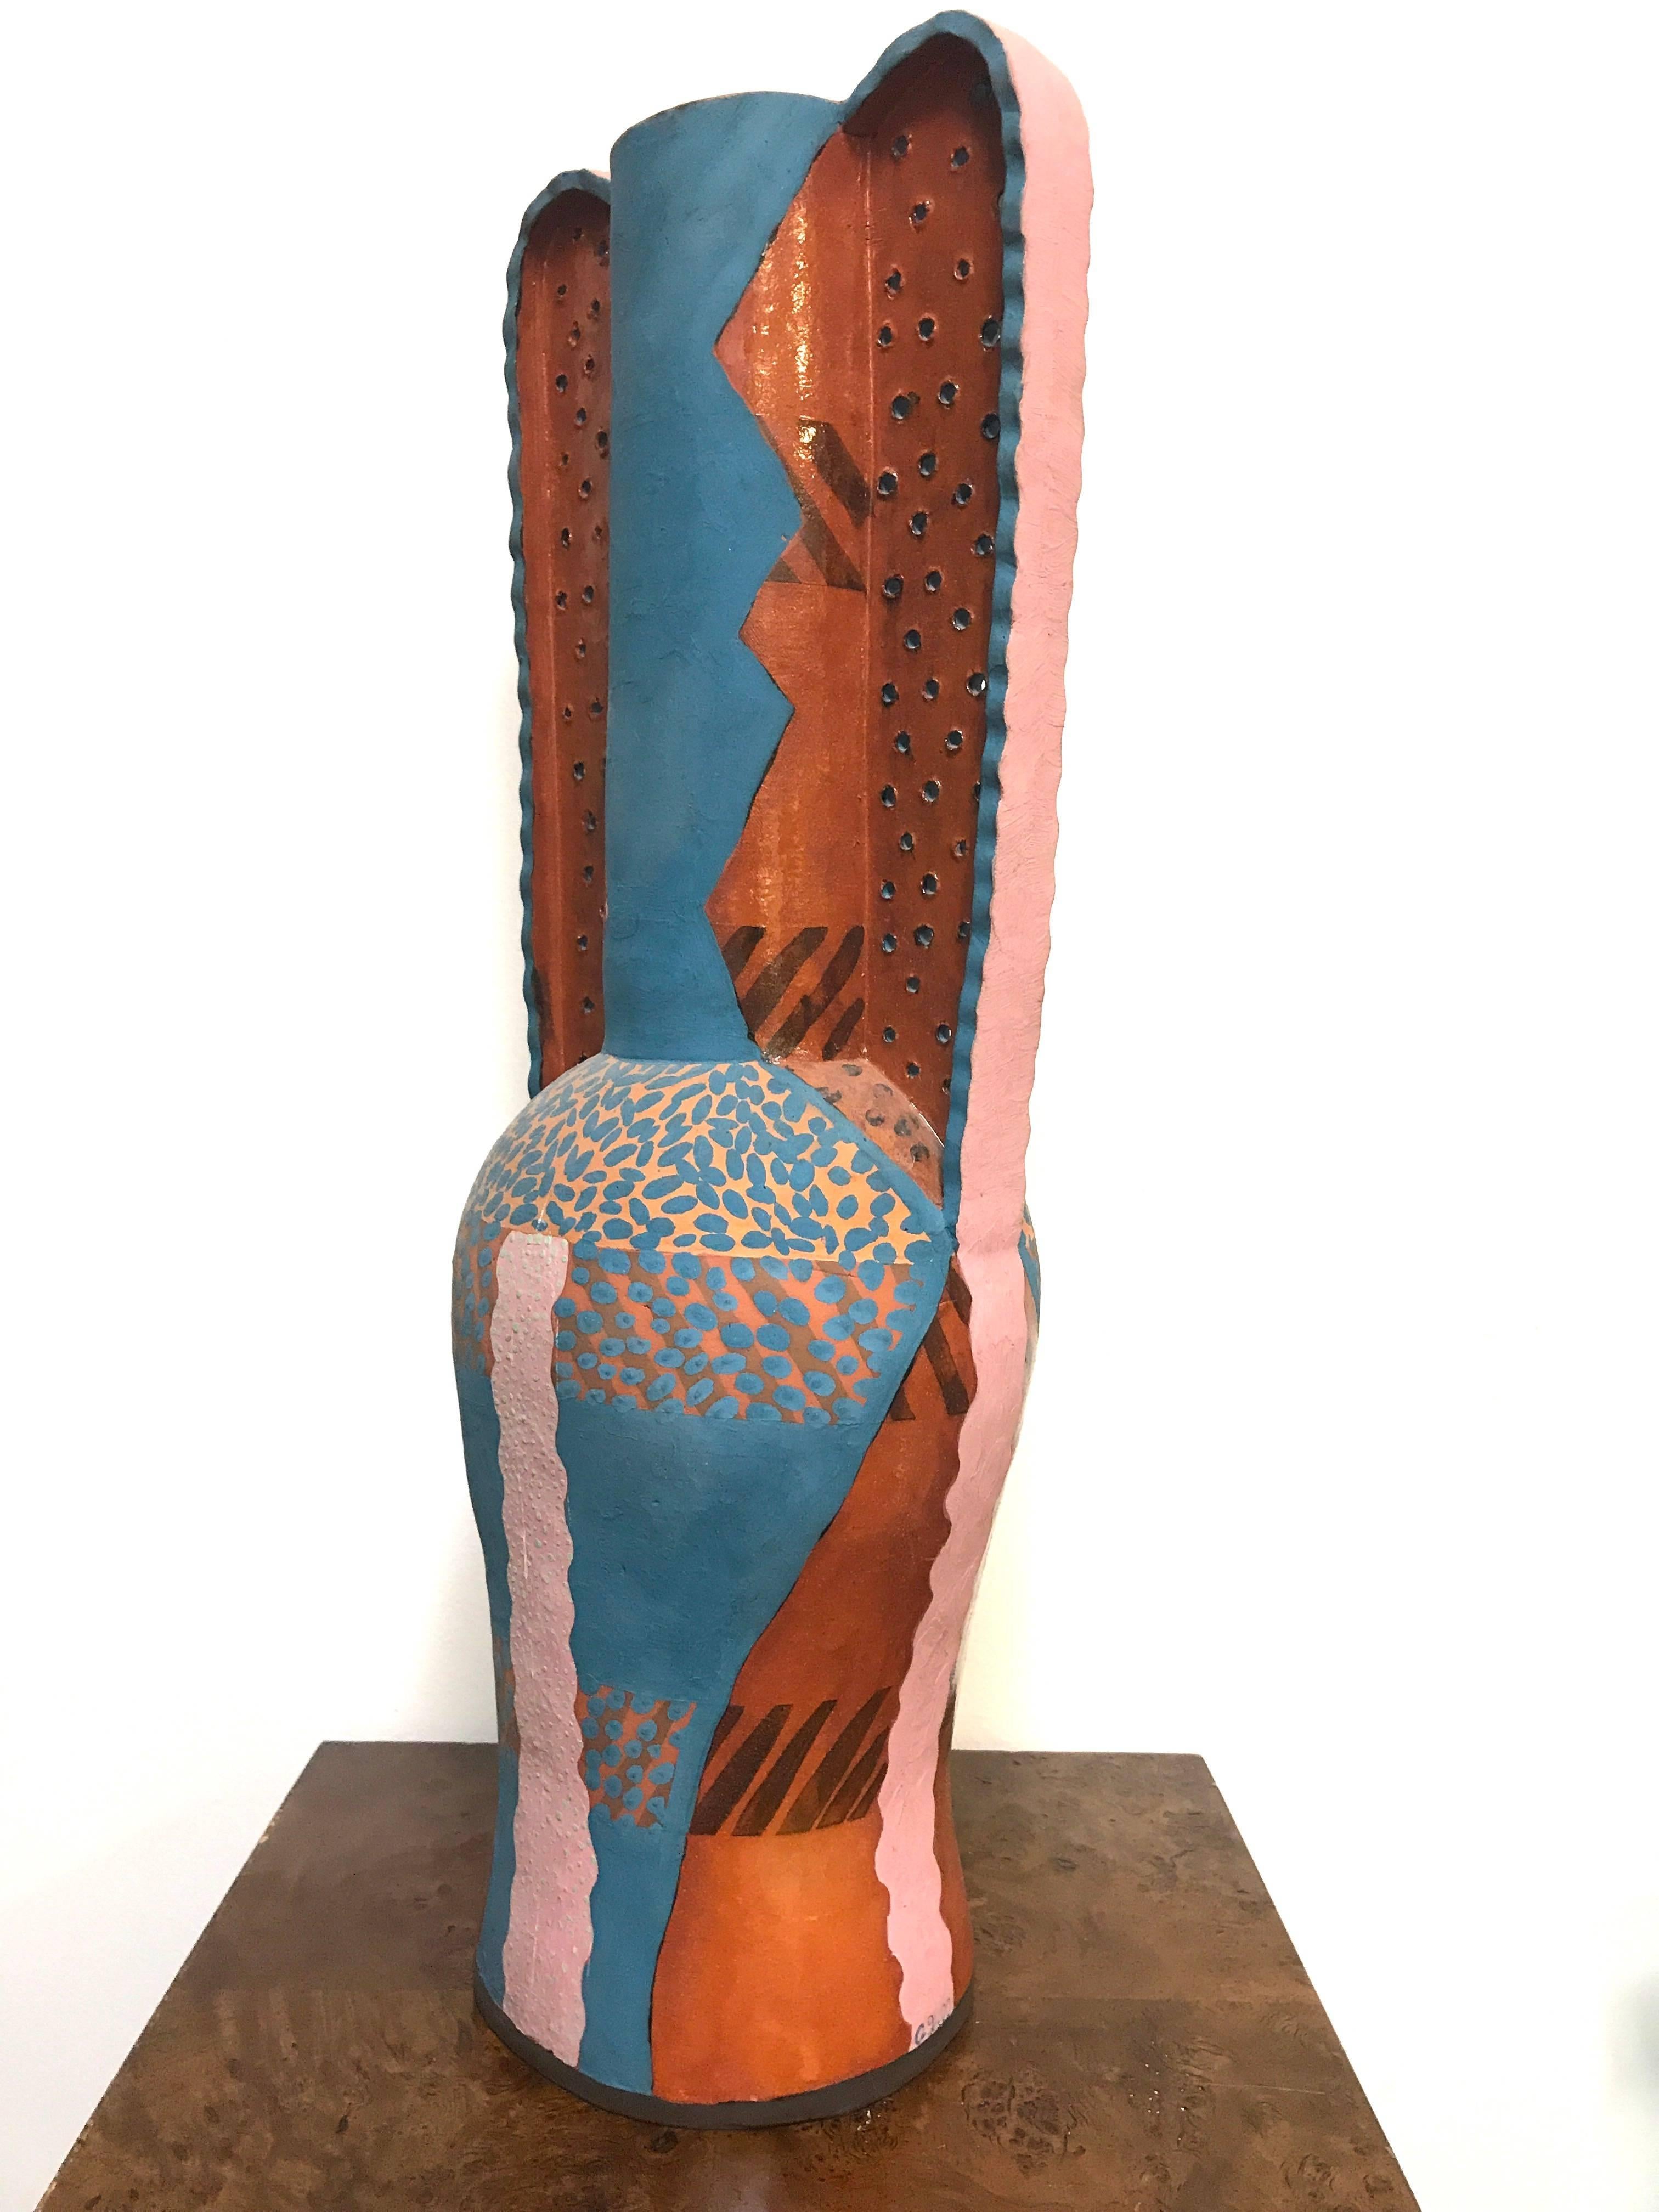 For your consideration is a pottery ceramic painted vessel by Andrea Gill. Signed by the artist.

Measure: H 25.25